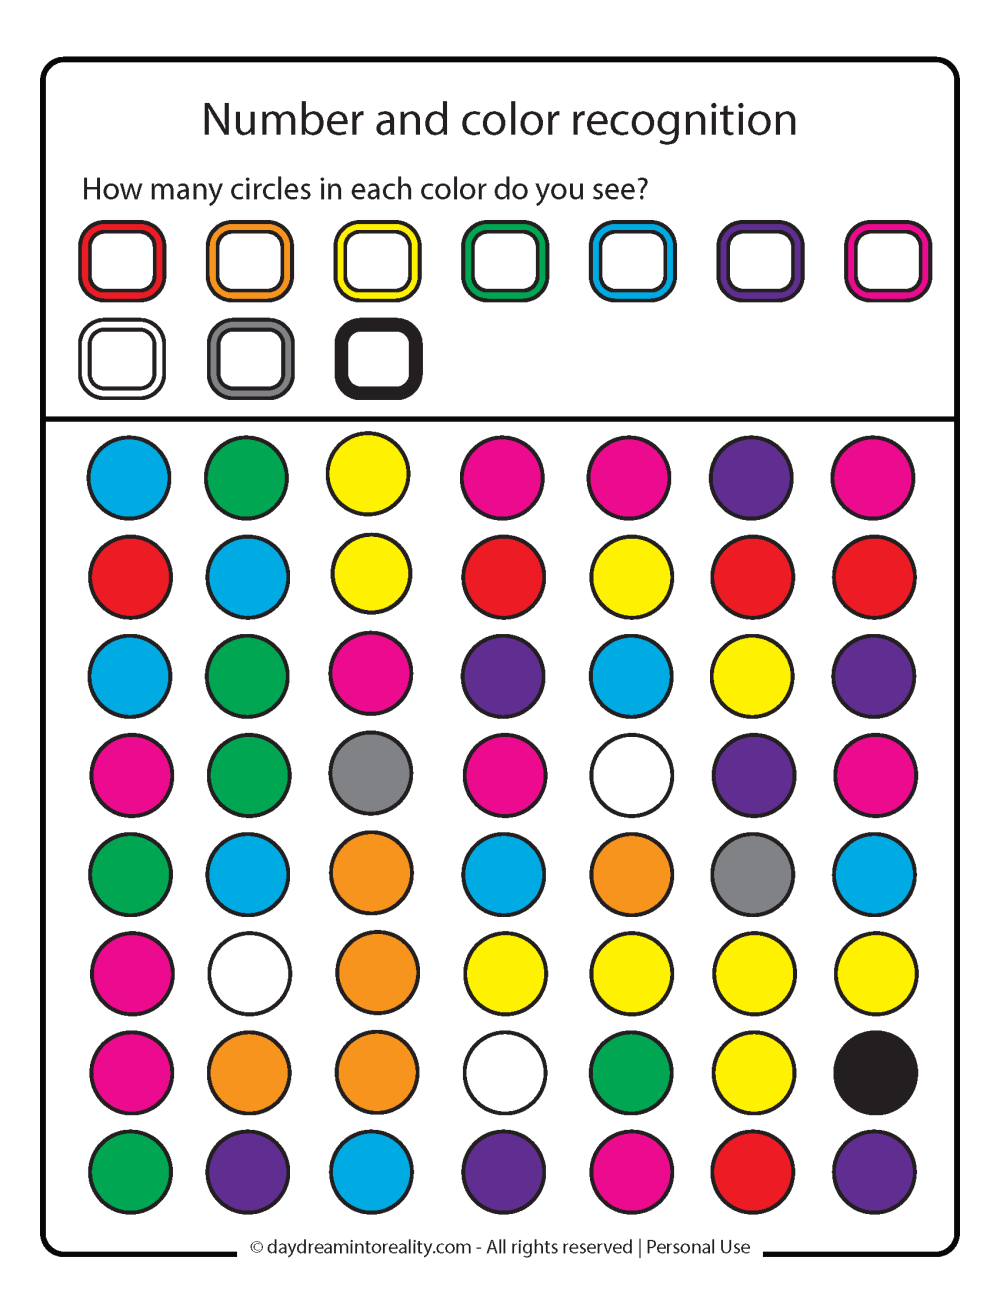 numbers 1 - 10 counting, color and number recognition worksheet free printable.